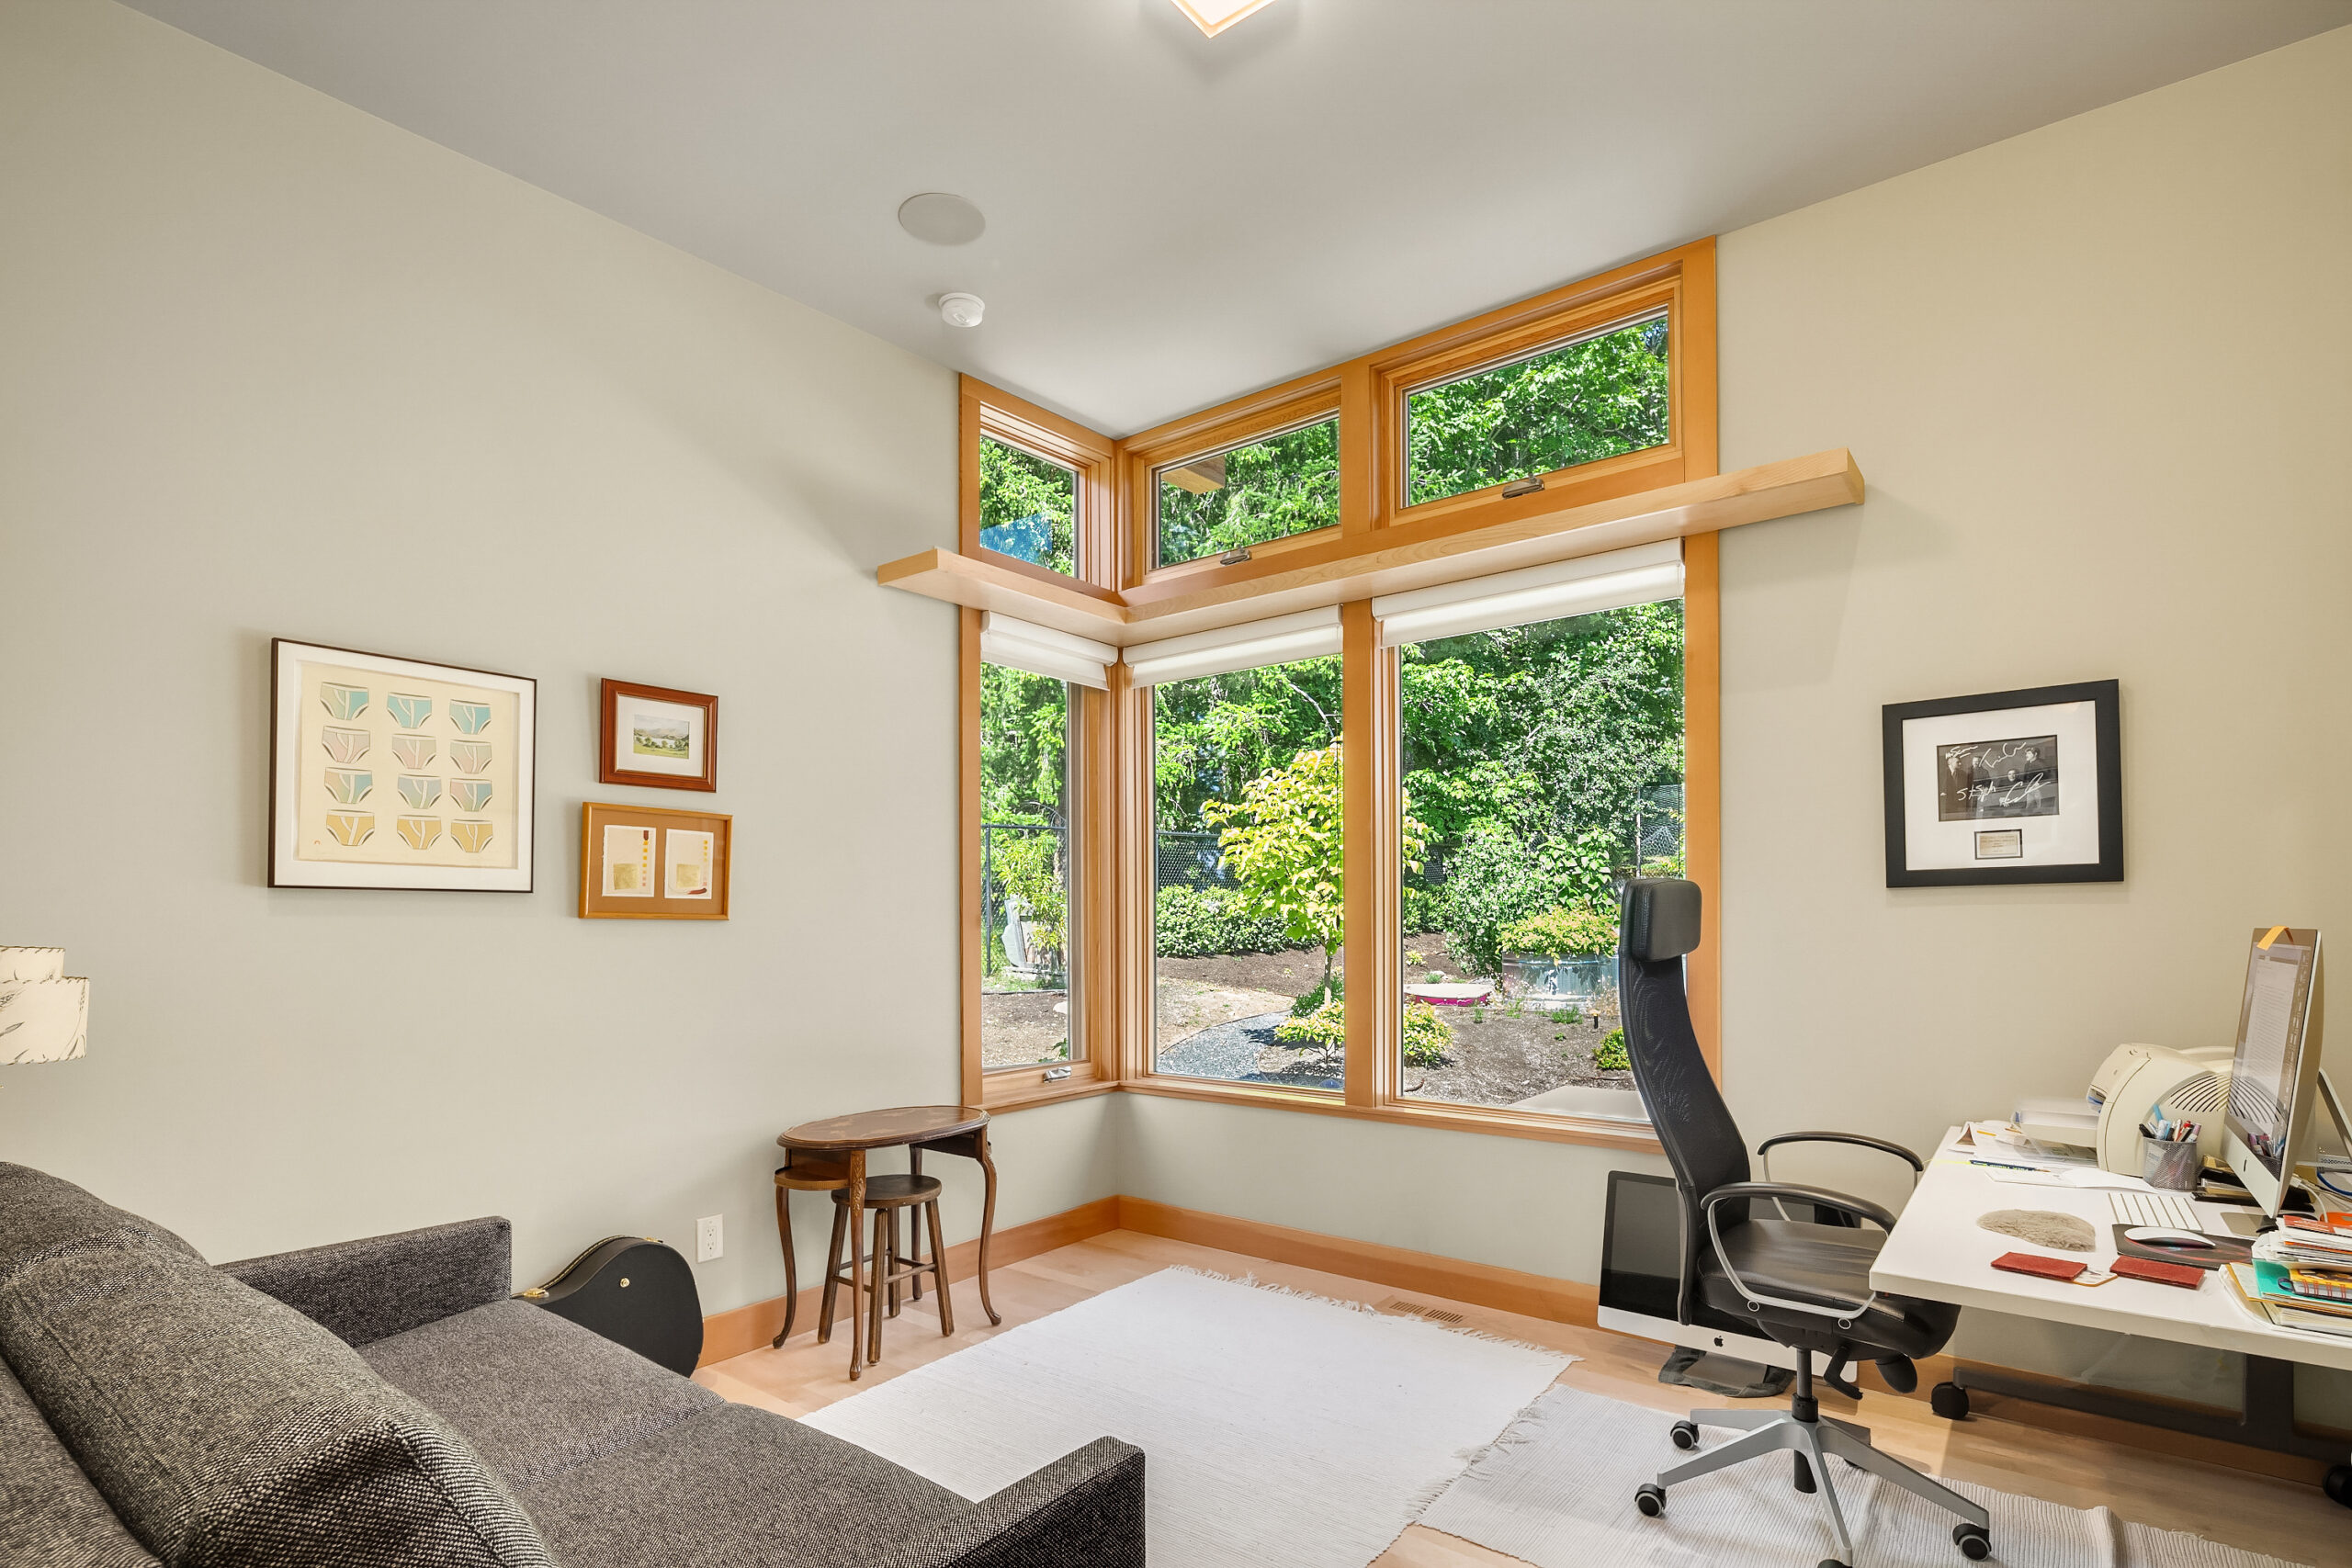 interior view of small home office; desk and chair with computer leave room for foldout couch allowing for use as guest room; ample windows open the space to the outdoors foliage - photo